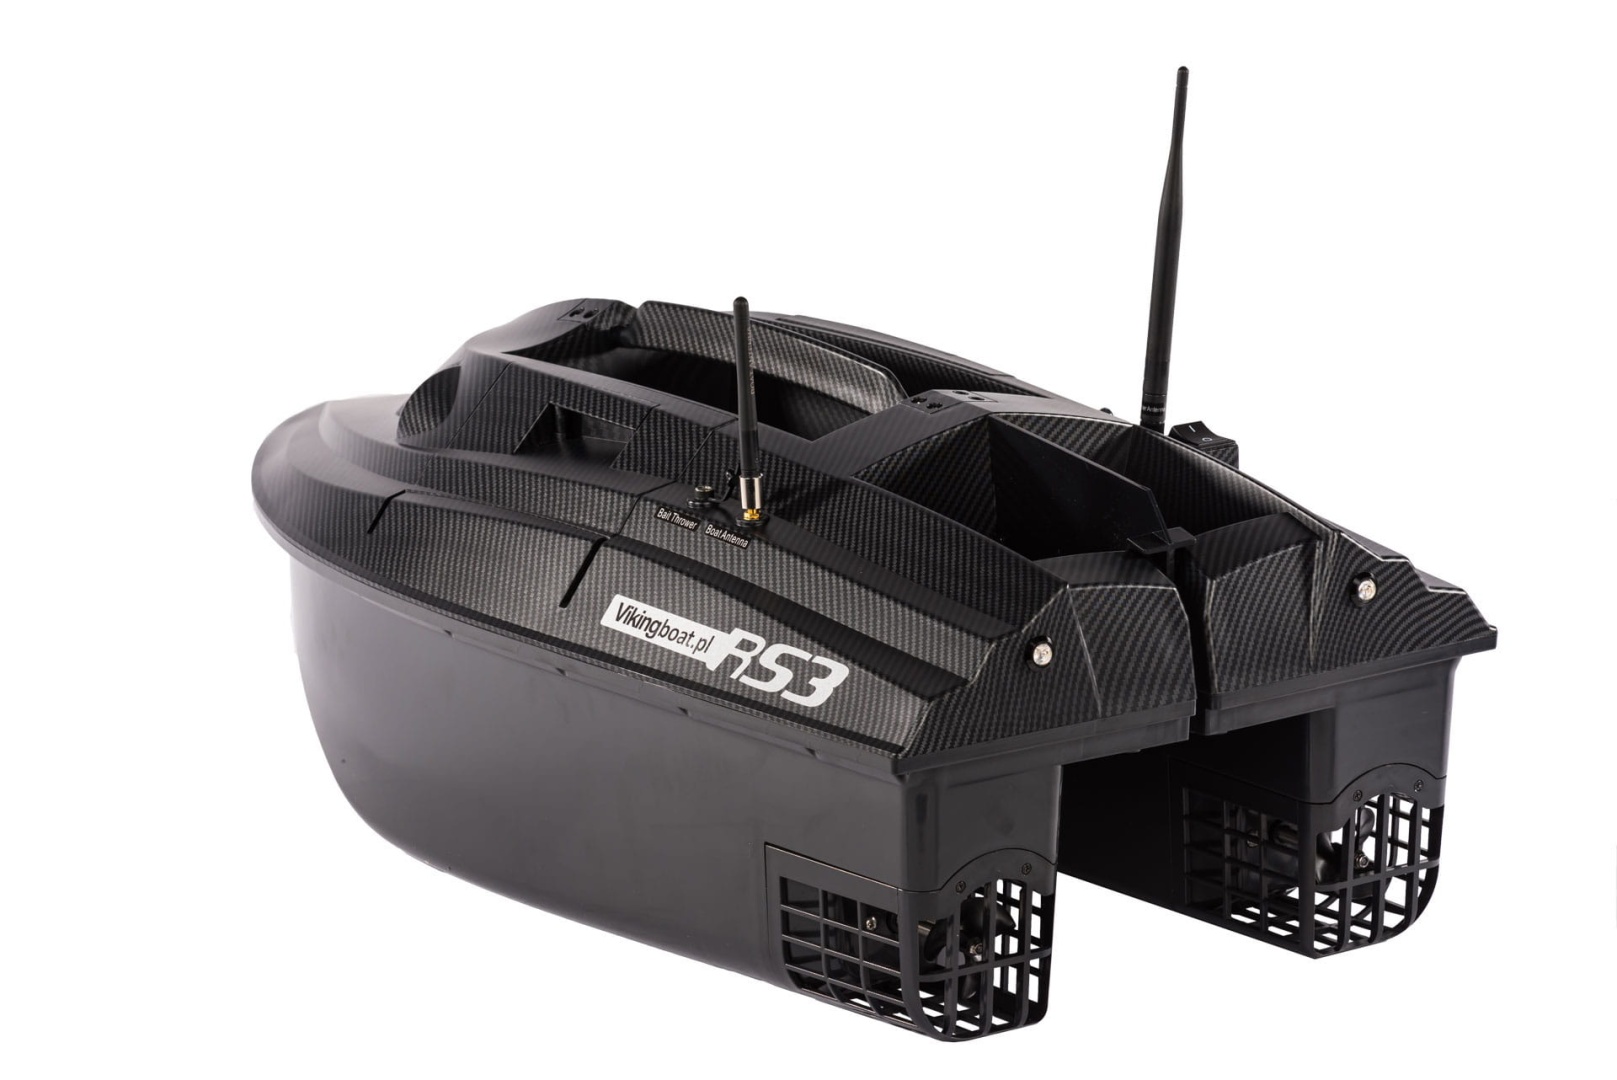 Viking Boat RS3 Carbon - (Fishfinder All in One in Remote + Bait Spreader)